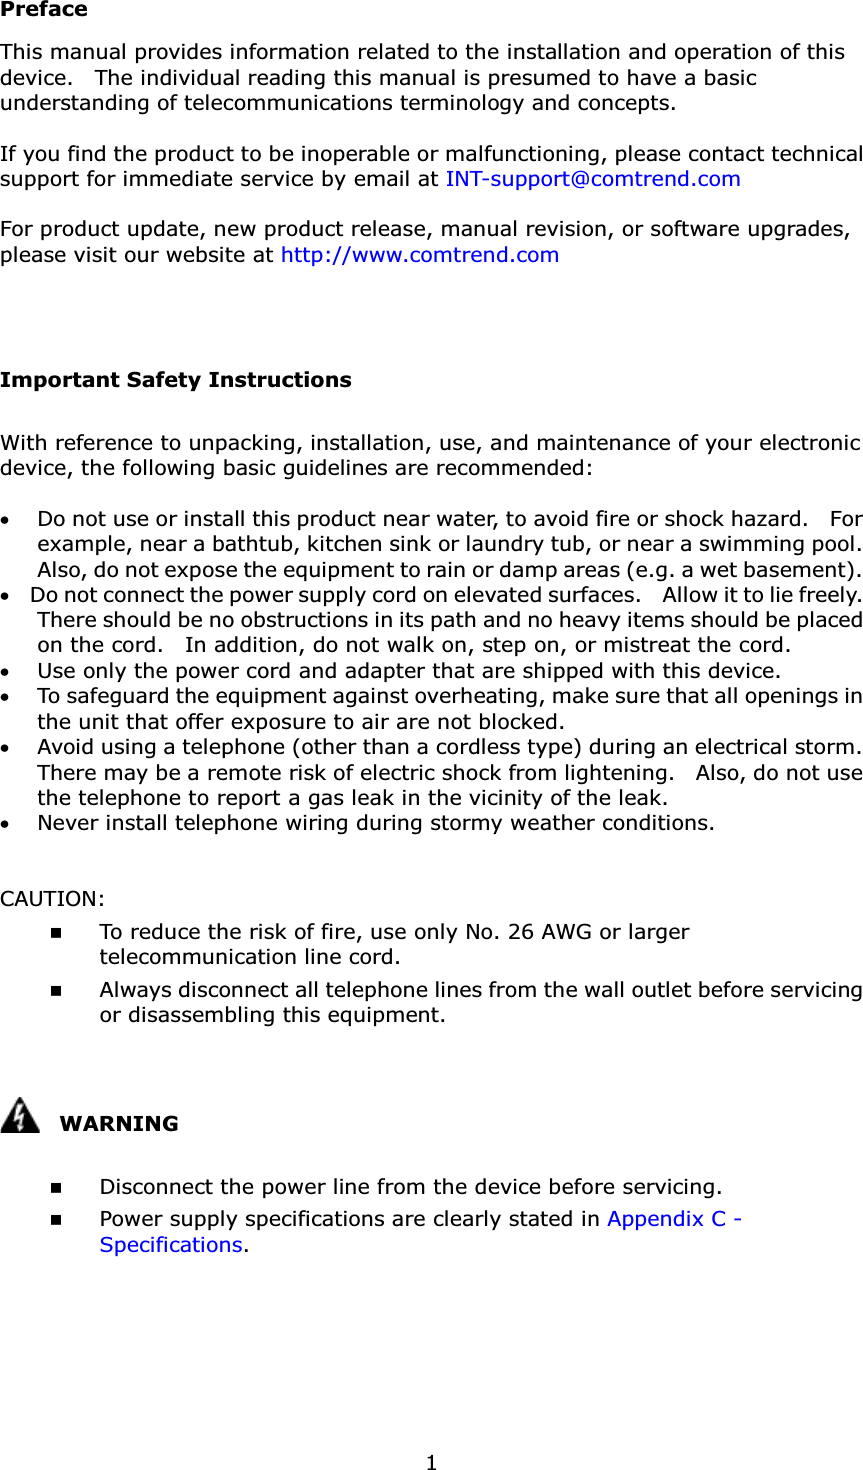 1PrefaceThis manual provides information related to the installation and operation of this device.    The individual reading this manual is presumed to have a basic understanding of telecommunications terminology and concepts.   If you find the product to be inoperable or malfunctioning, please contact technical support for immediate service by email at INT-support@comtrend.comFor product update, new product release, manual revision, or software upgrades, please visit our website at http://www.comtrend.comImportant Safety InstructionsWith reference to unpacking, installation, use, and maintenance of your electronic device, the following basic guidelines are recommended:x Do not use or install this product near water, to avoid fire or shock hazard.    For example, near a bathtub, kitchen sink or laundry tub, or near a swimming pool.   Also, do not expose the equipment to rain or damp areas (e.g. a wet basement).x Do not connect the power supply cord on elevated surfaces.    Allow it to lie freely.   There should be no obstructions in its path and no heavy items should be placed on the cord.    In addition, do not walk on, step on, or mistreat the cord.x Use only the power cord and adapter that are shipped with this device.x To safeguard the equipment against overheating, make sure that all openings in the unit that offer exposure to air are not blocked.x Avoid using a telephone (other than a cordless type) during an electrical storm.   There may be a remote risk of electric shock from lightening.    Also, do not use the telephone to report a gas leak in the vicinity of the leak.x Never install telephone wiring during stormy weather conditions.CAUTION: To reduce the risk of fire, use only No. 26 AWG or larger telecommunication line cord. Always disconnect all telephone lines from the wall outlet before servicing or disassembling this equipment.WARNING Disconnect the power line from the device before servicing.  Power supply specifications are clearly stated in Appendix C -Specifications. 